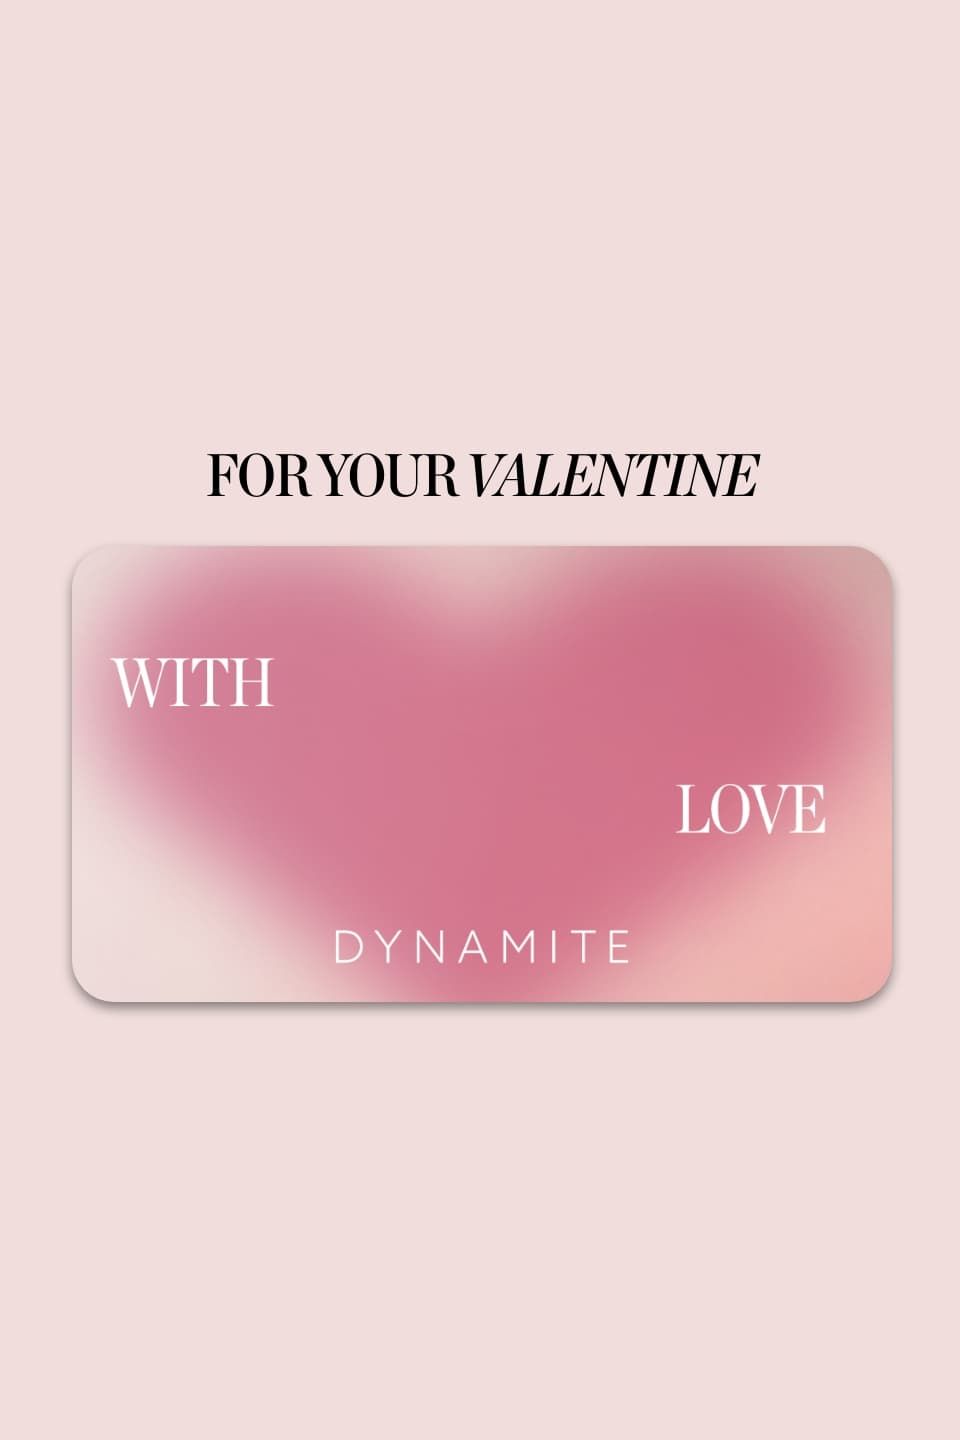 A Valentine's Day pink gift card with a heart graphic and 'with love' written on it.